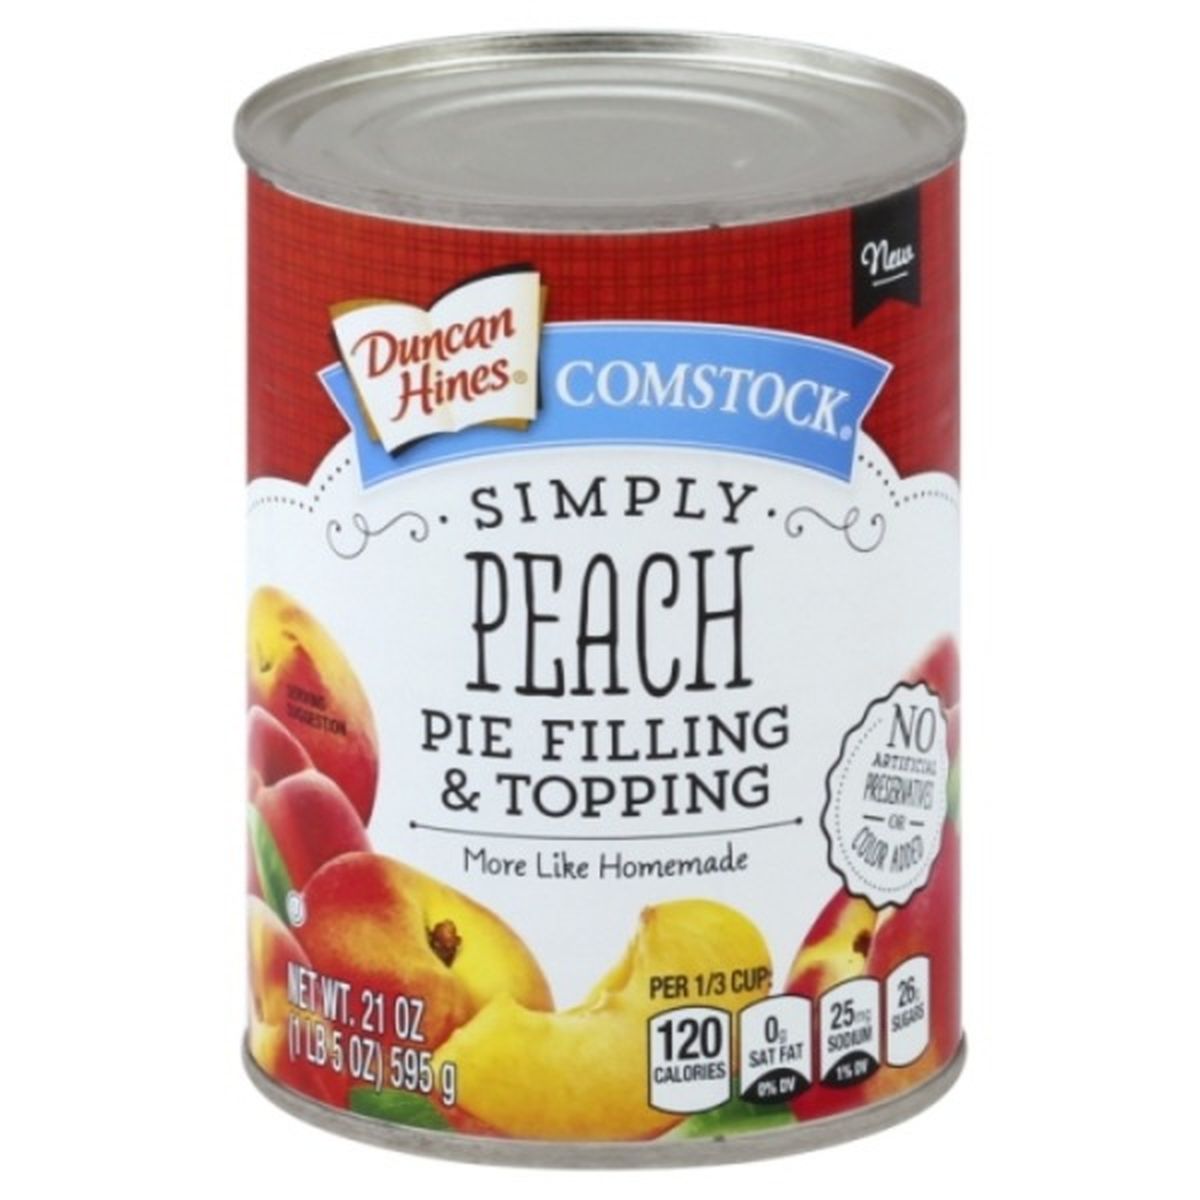 Calories in Duncan Hines Comstock Comstock Pie Filling & Topping, Simply Peach